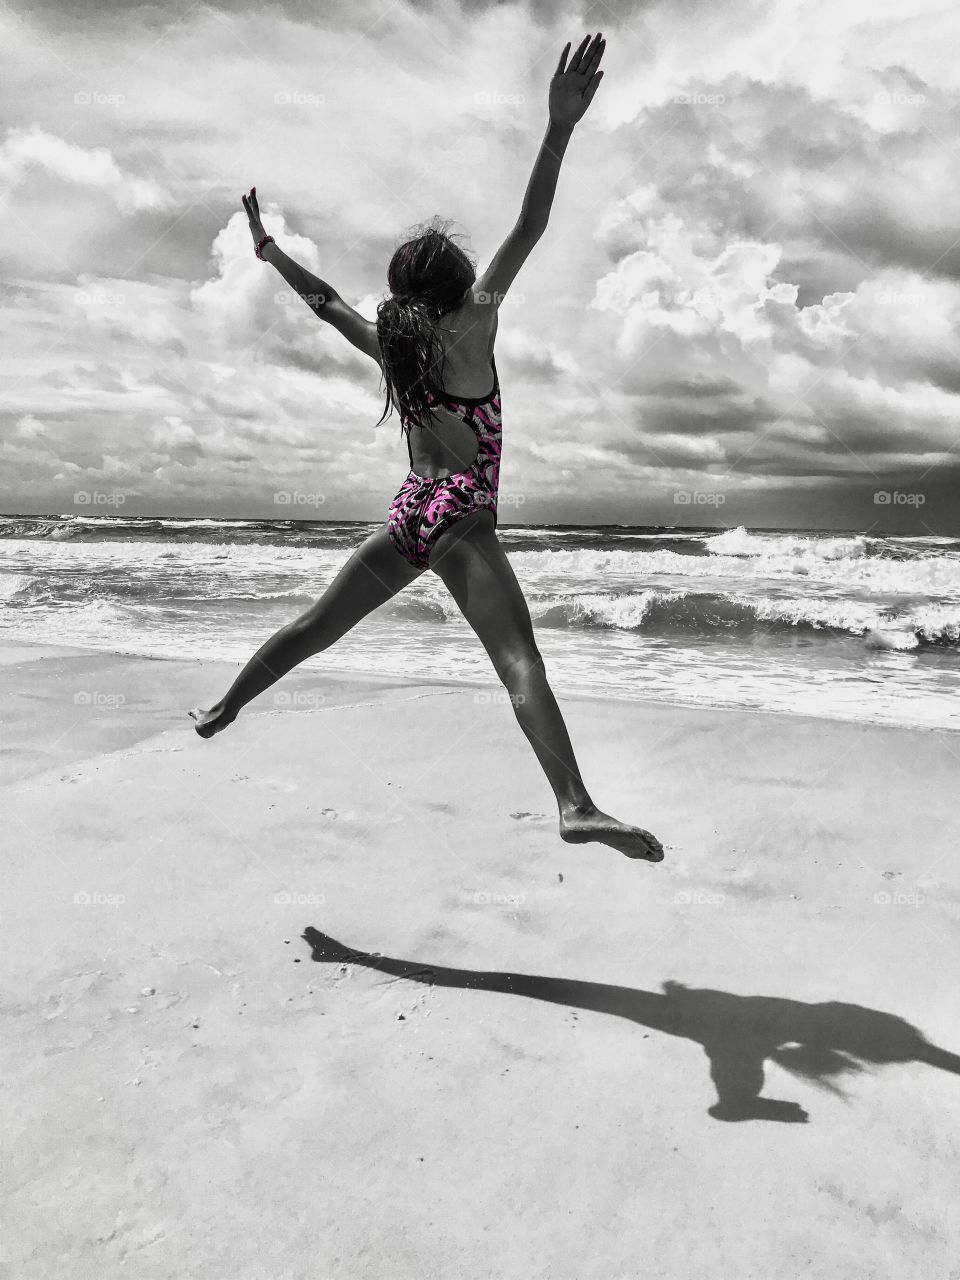 Jumping for joy to be at the beach